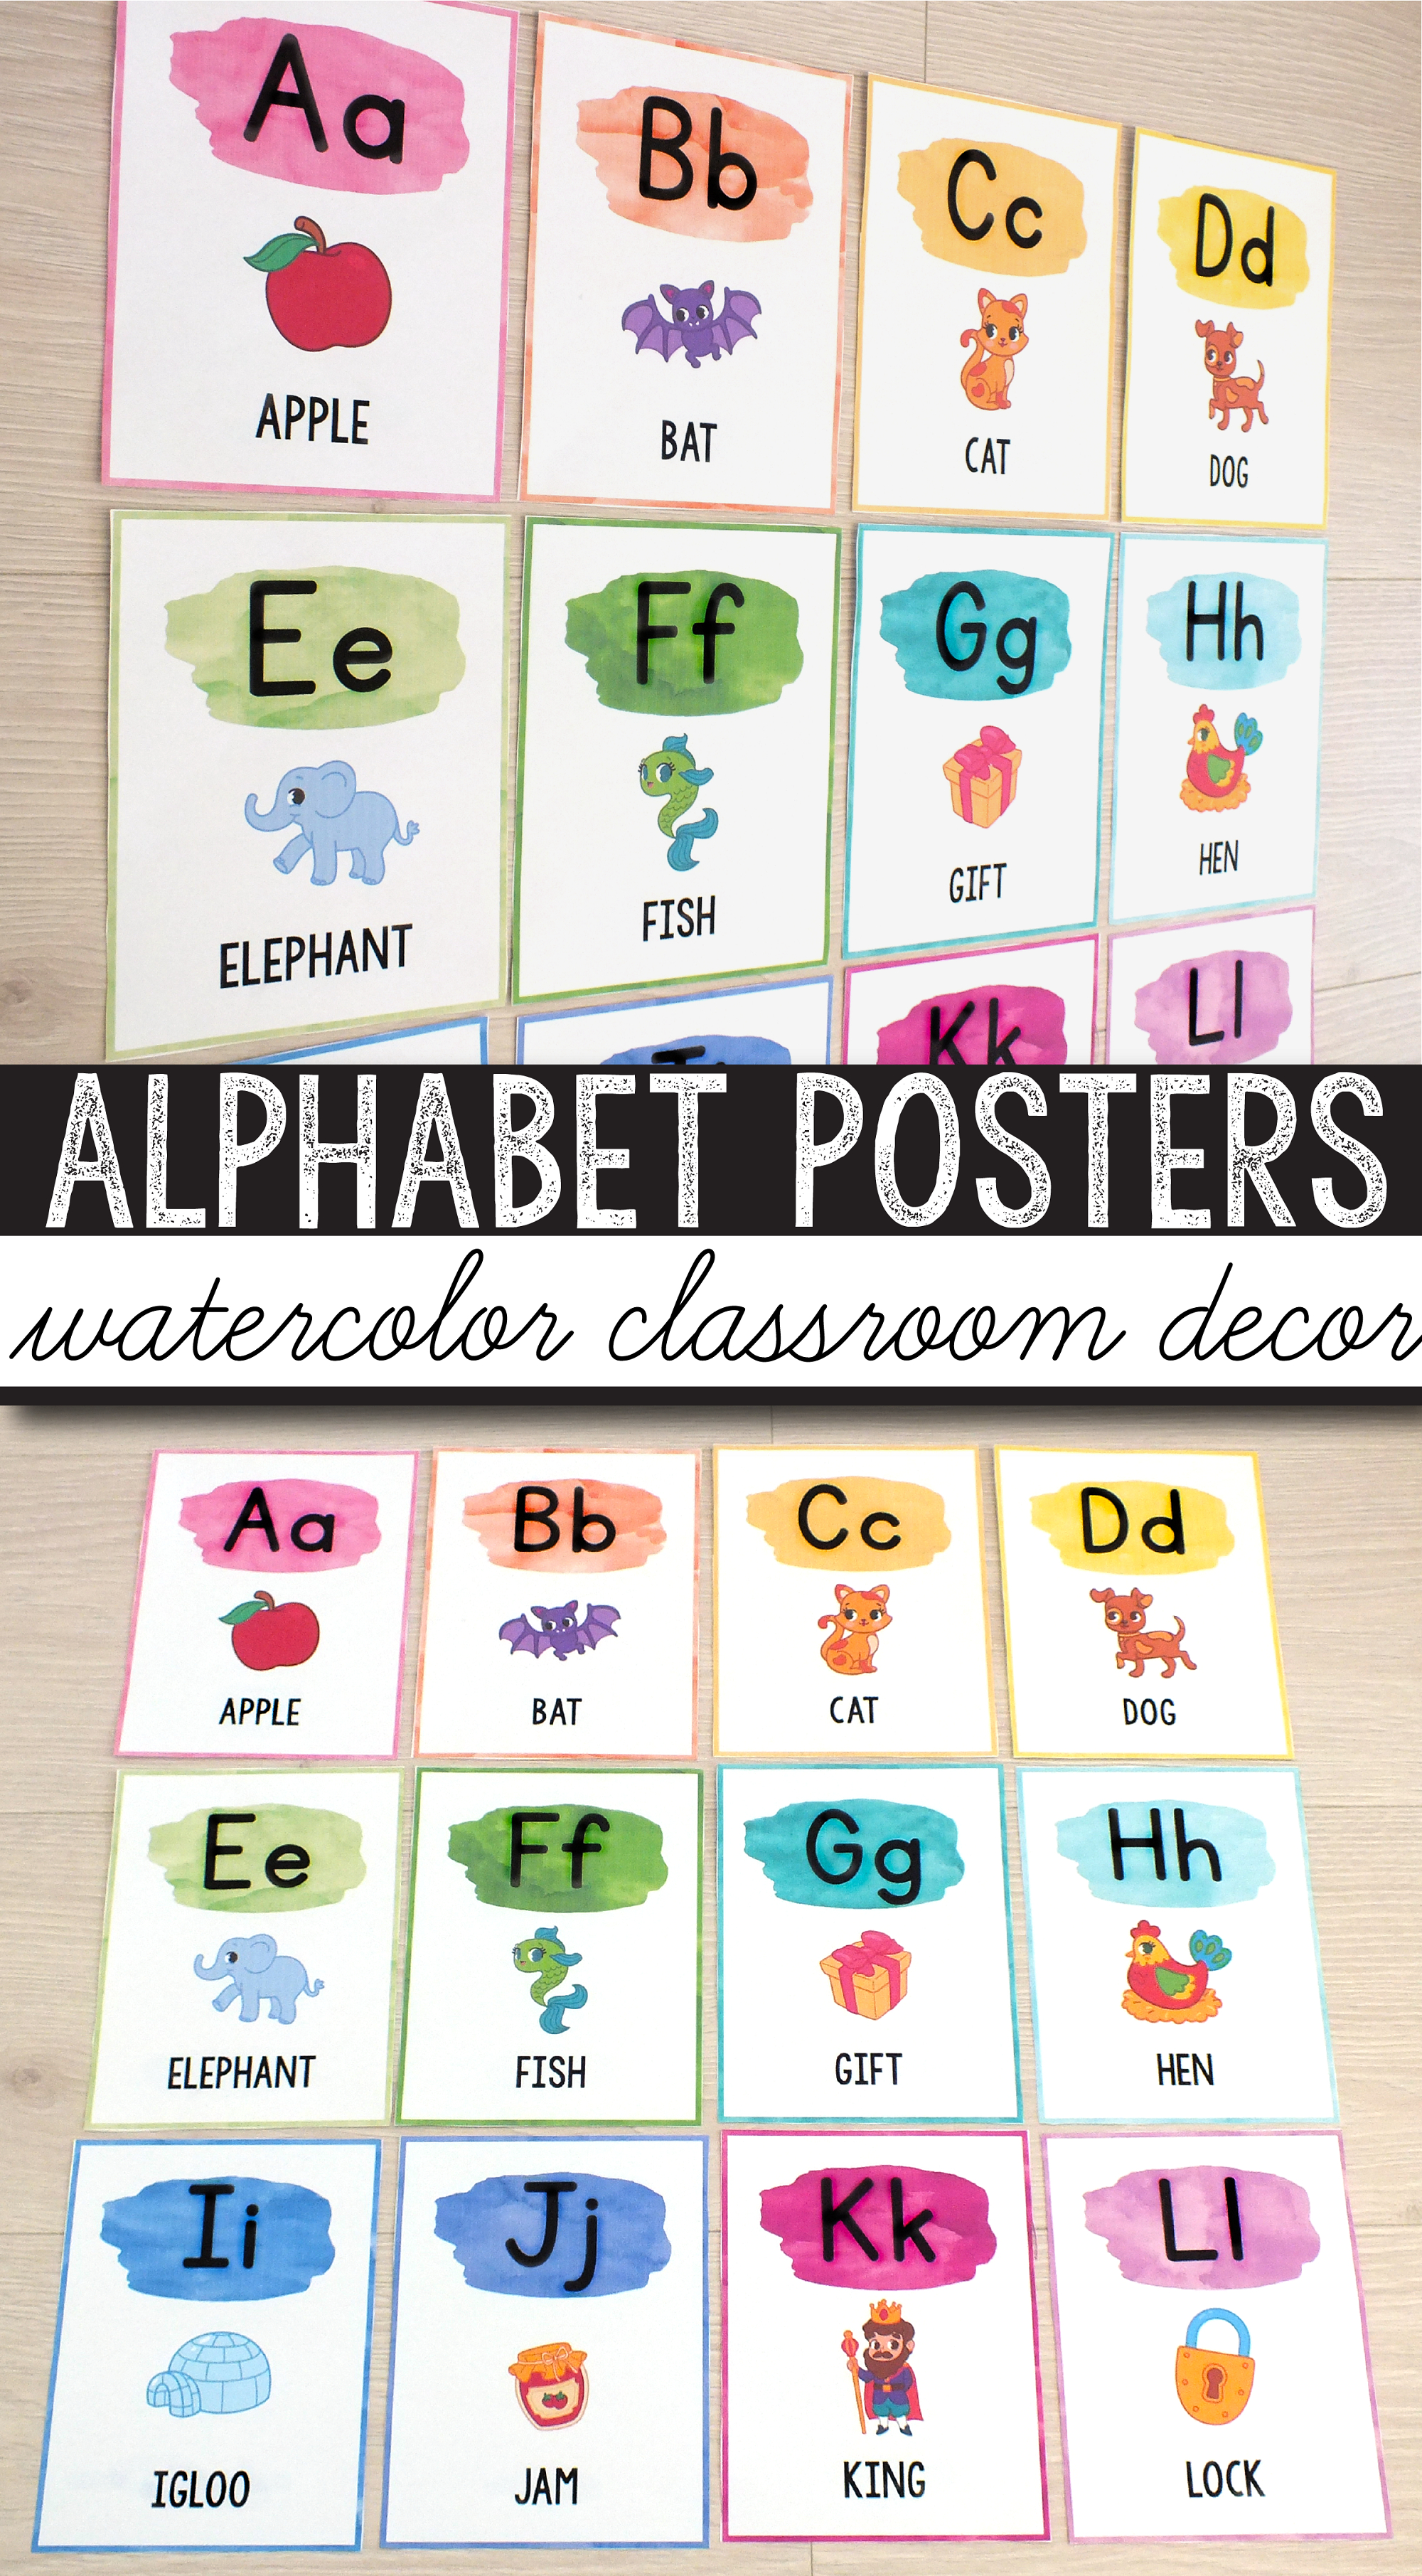 Free Alphabet Posters - Watercolor Classroom Decor | Education - Literacy Posters Free Printable